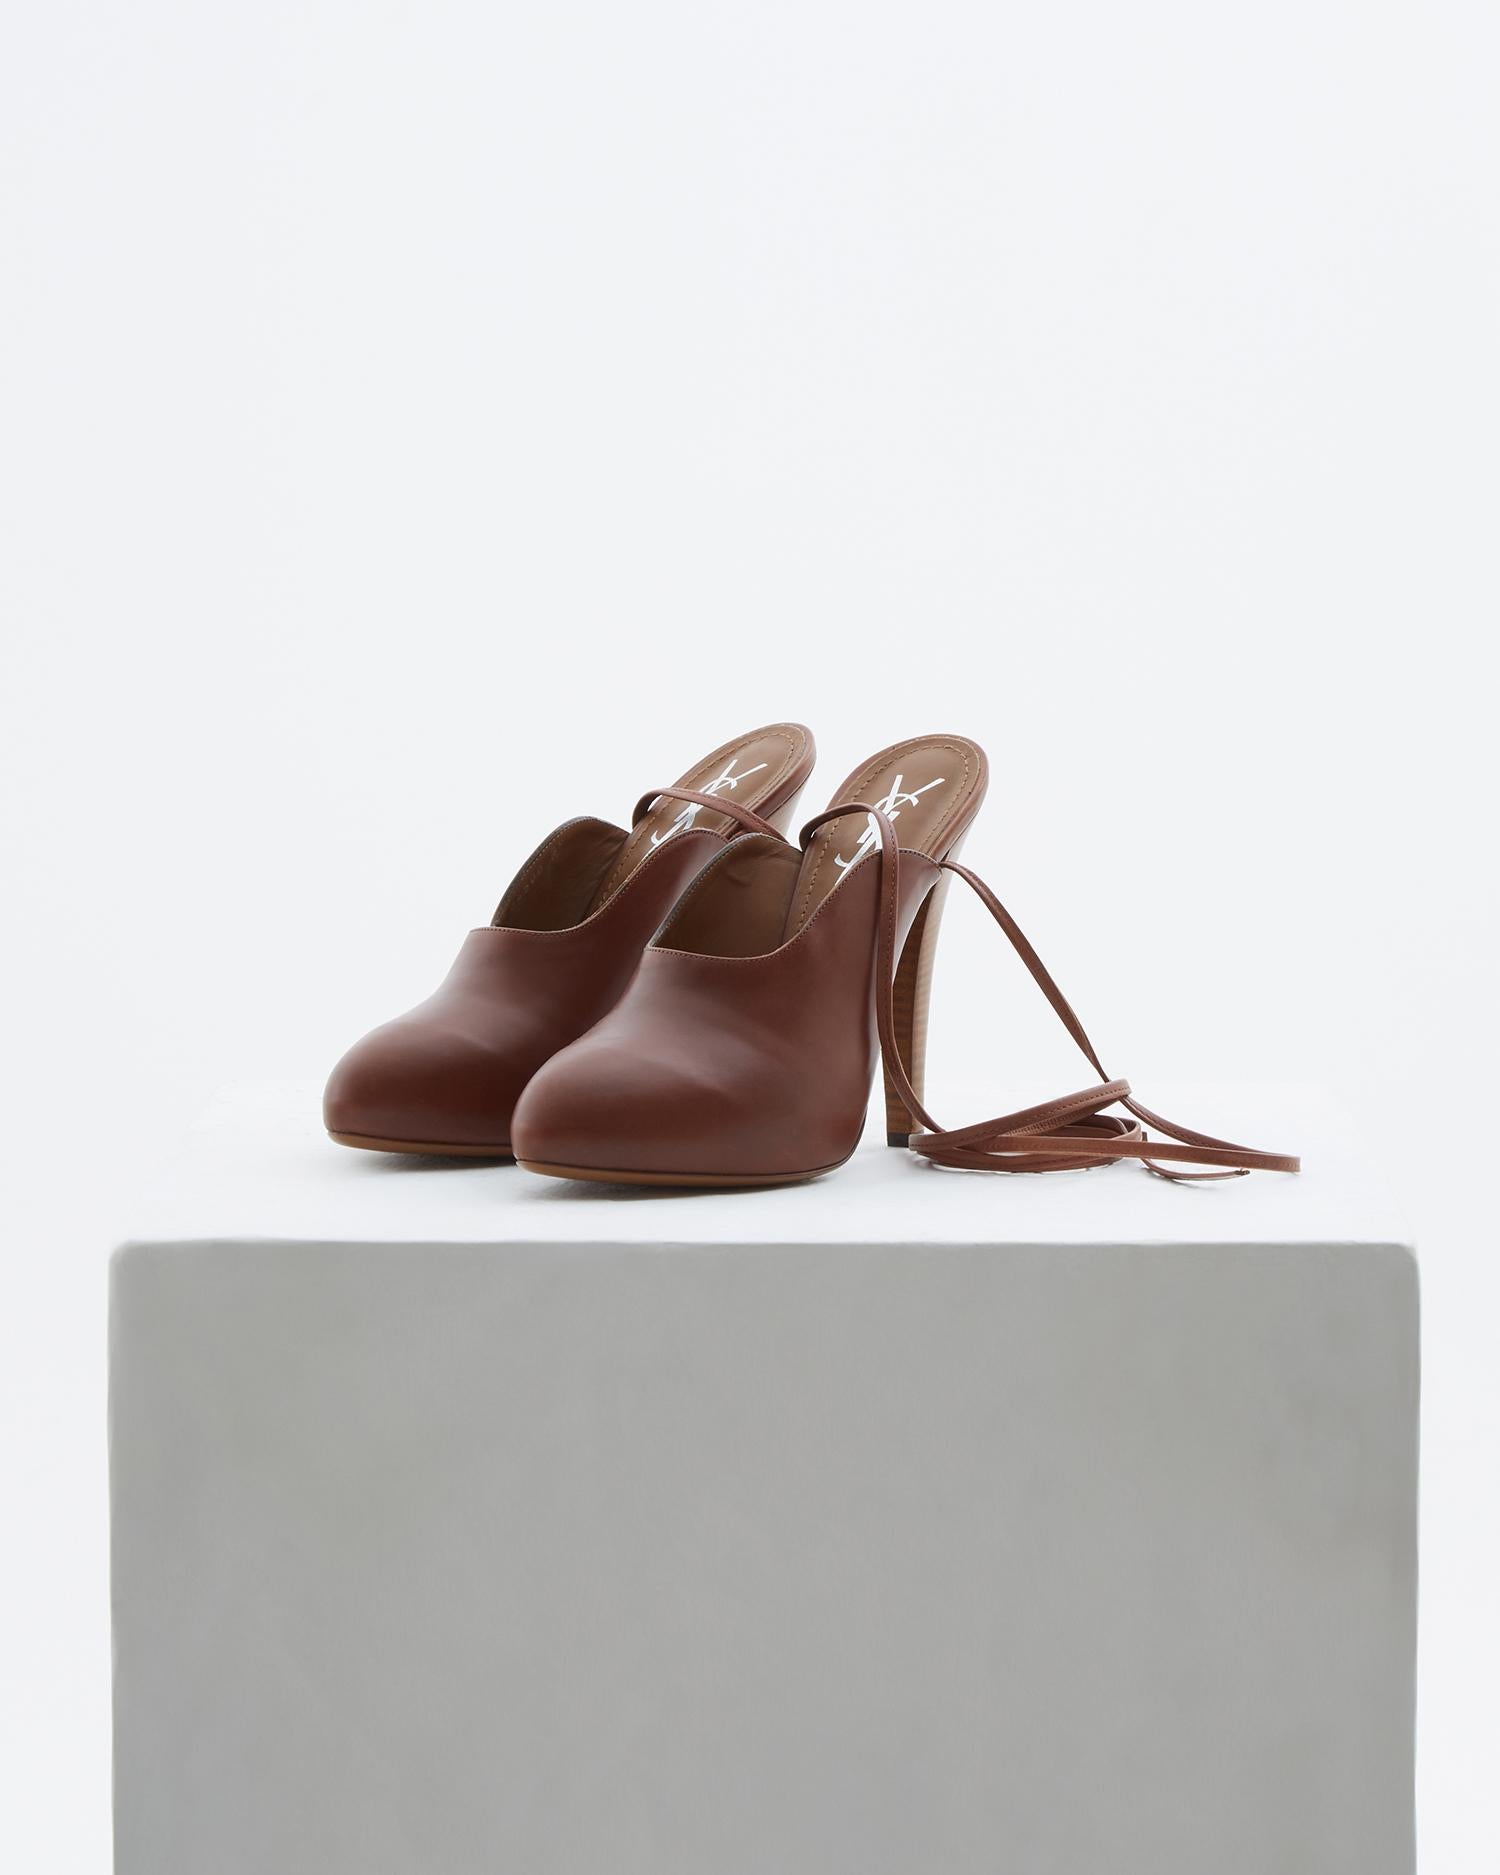 - Runway Look 14 
- Sold by Skof.Archive
- Designed by Stefano Pilati
- Brown leather closed toe
- Open back featuring a brown leather straps that wrap and climb the ankle 
- Without box

Size
39 EU

Measurements
•  Outsole length 18.5 cm / 7